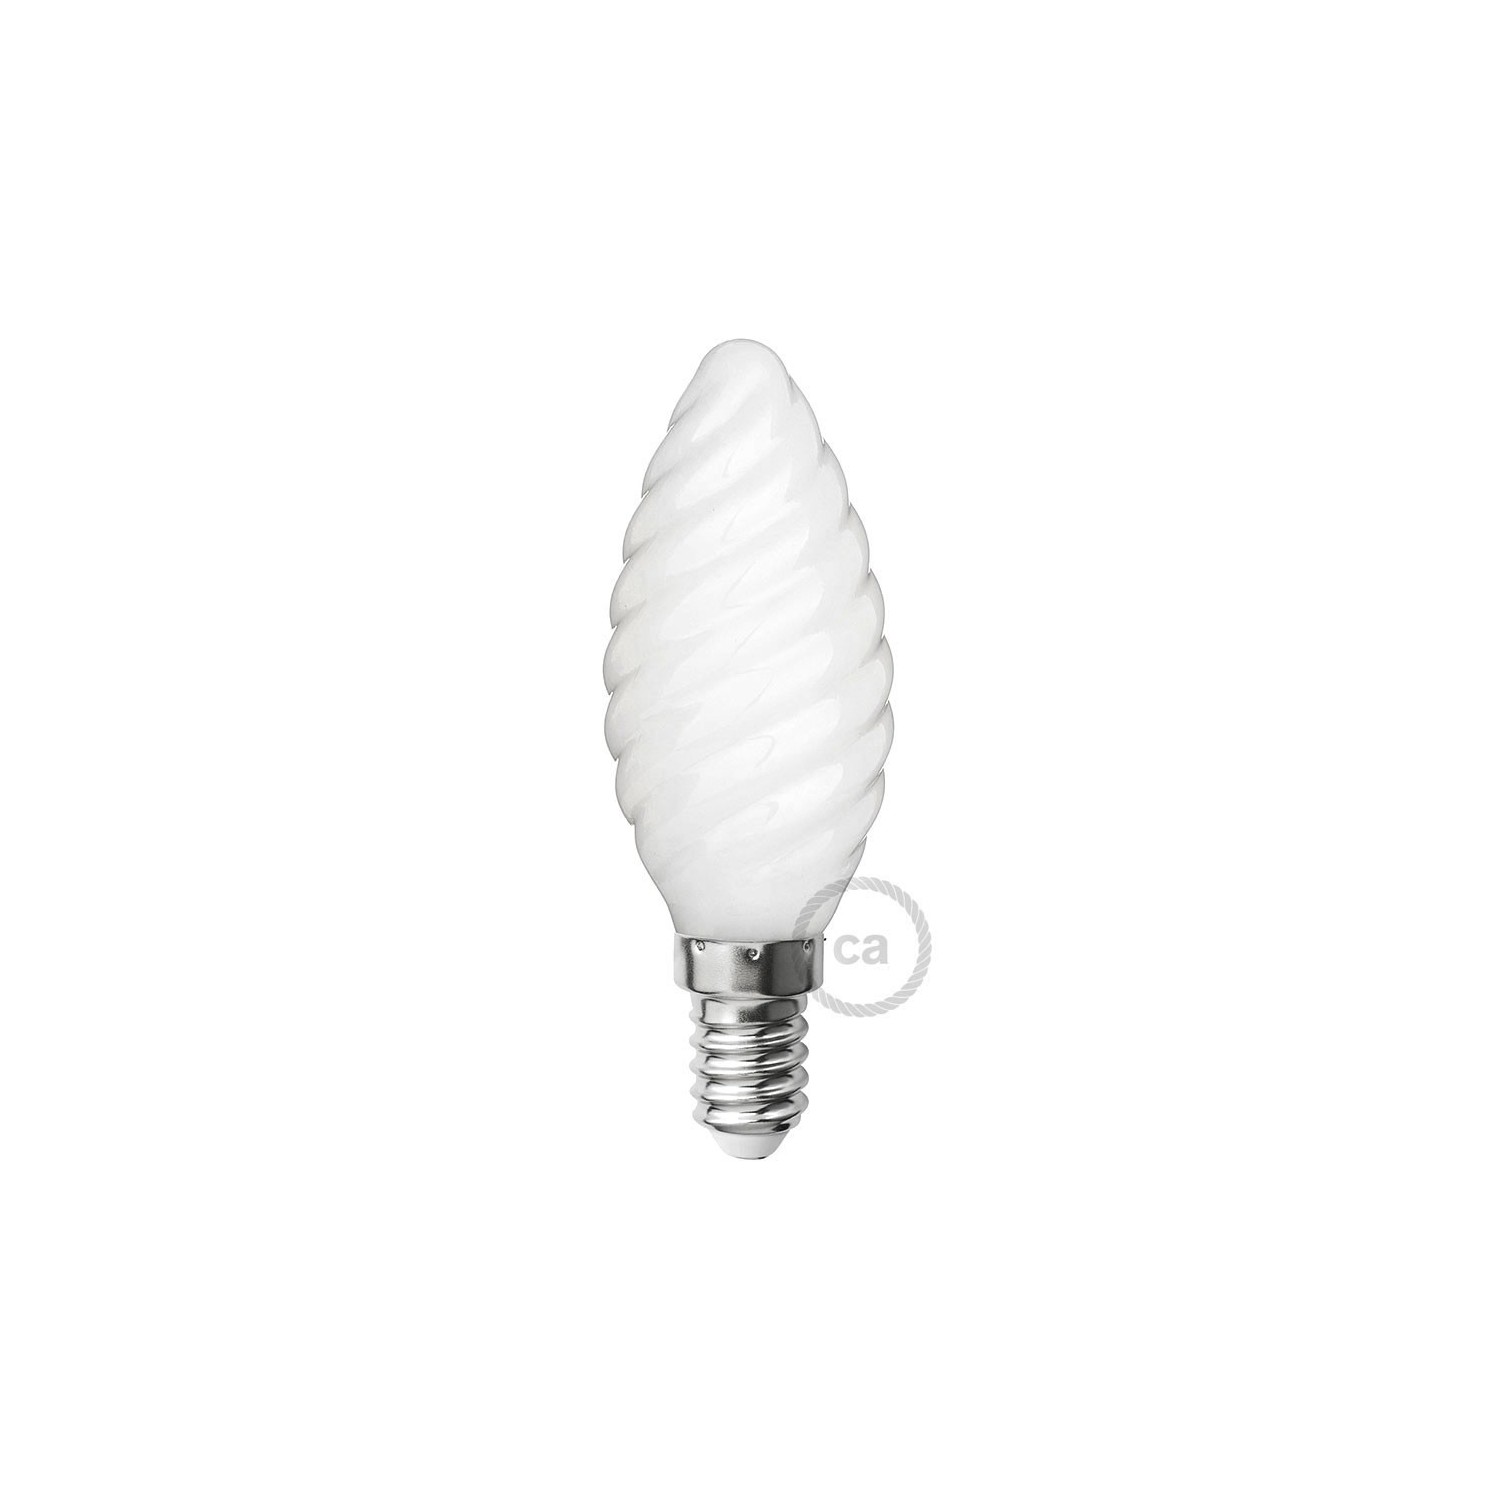 LED Milky White Light Bulb - Twisted Candle C35 - 4W 300Lm E14 2700K Dimmable